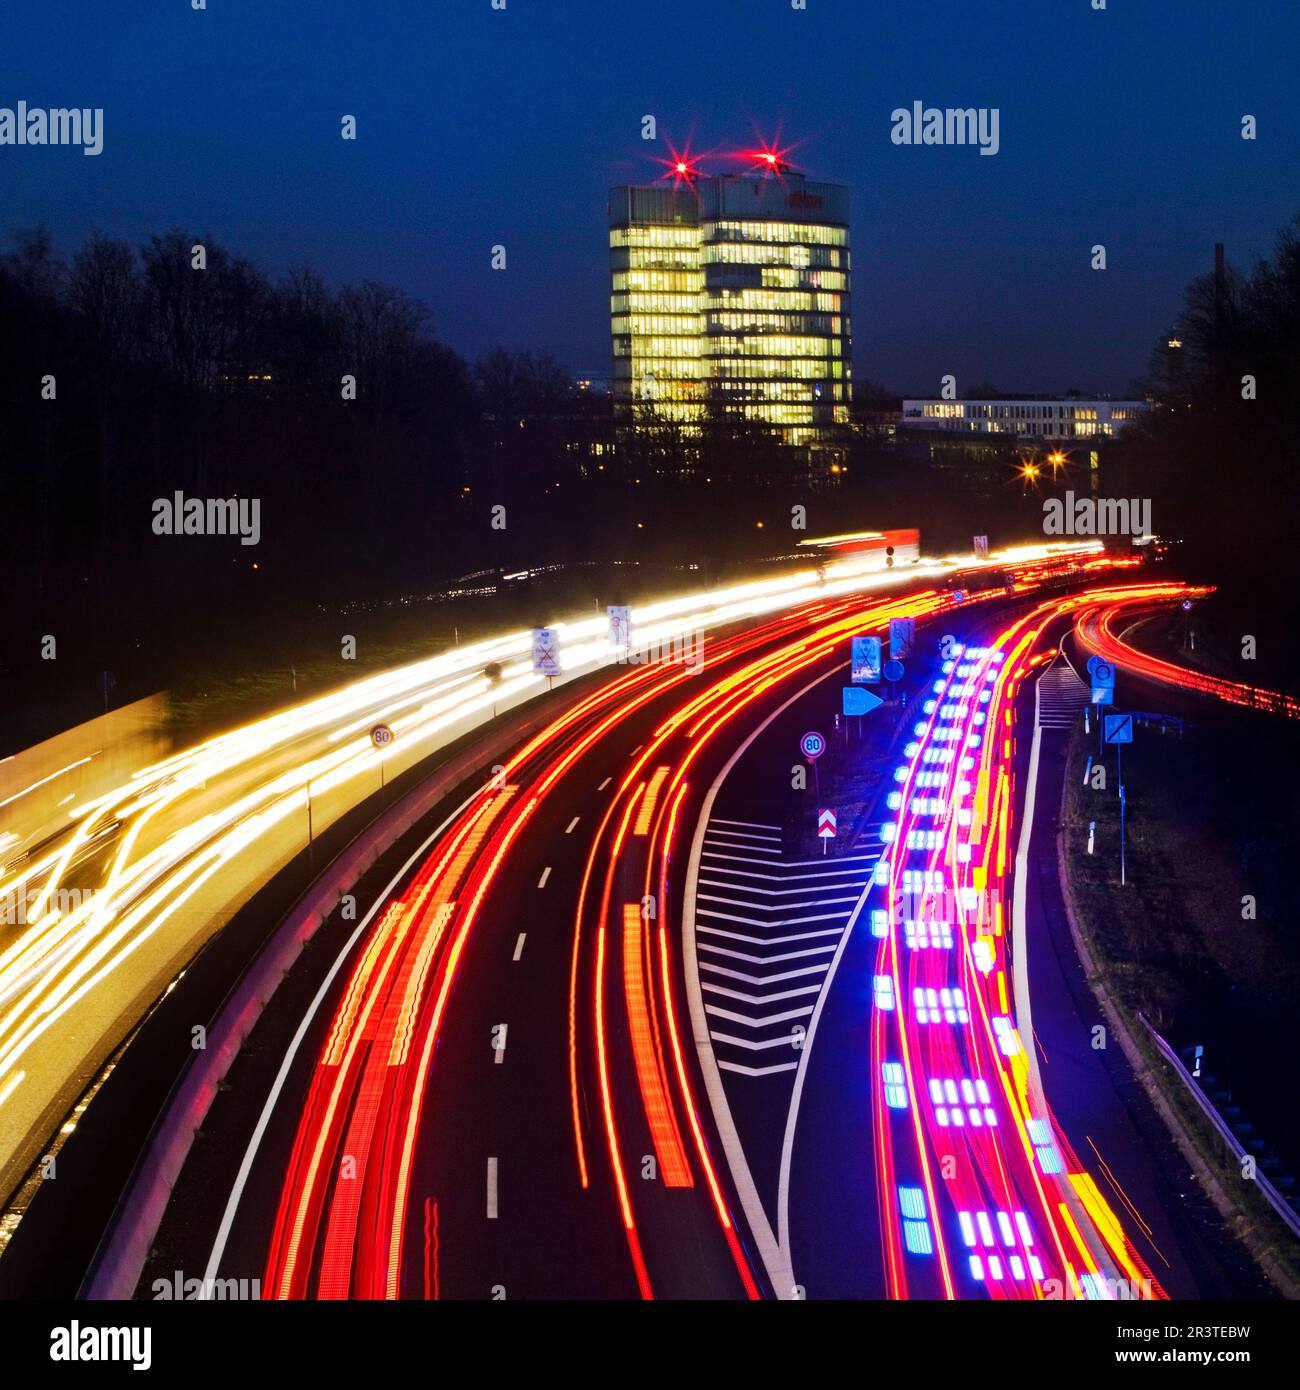 Highway A 52 and the E.ON SE corporate headquarters in the evening, Essen, Germany, Europe Stock Photo